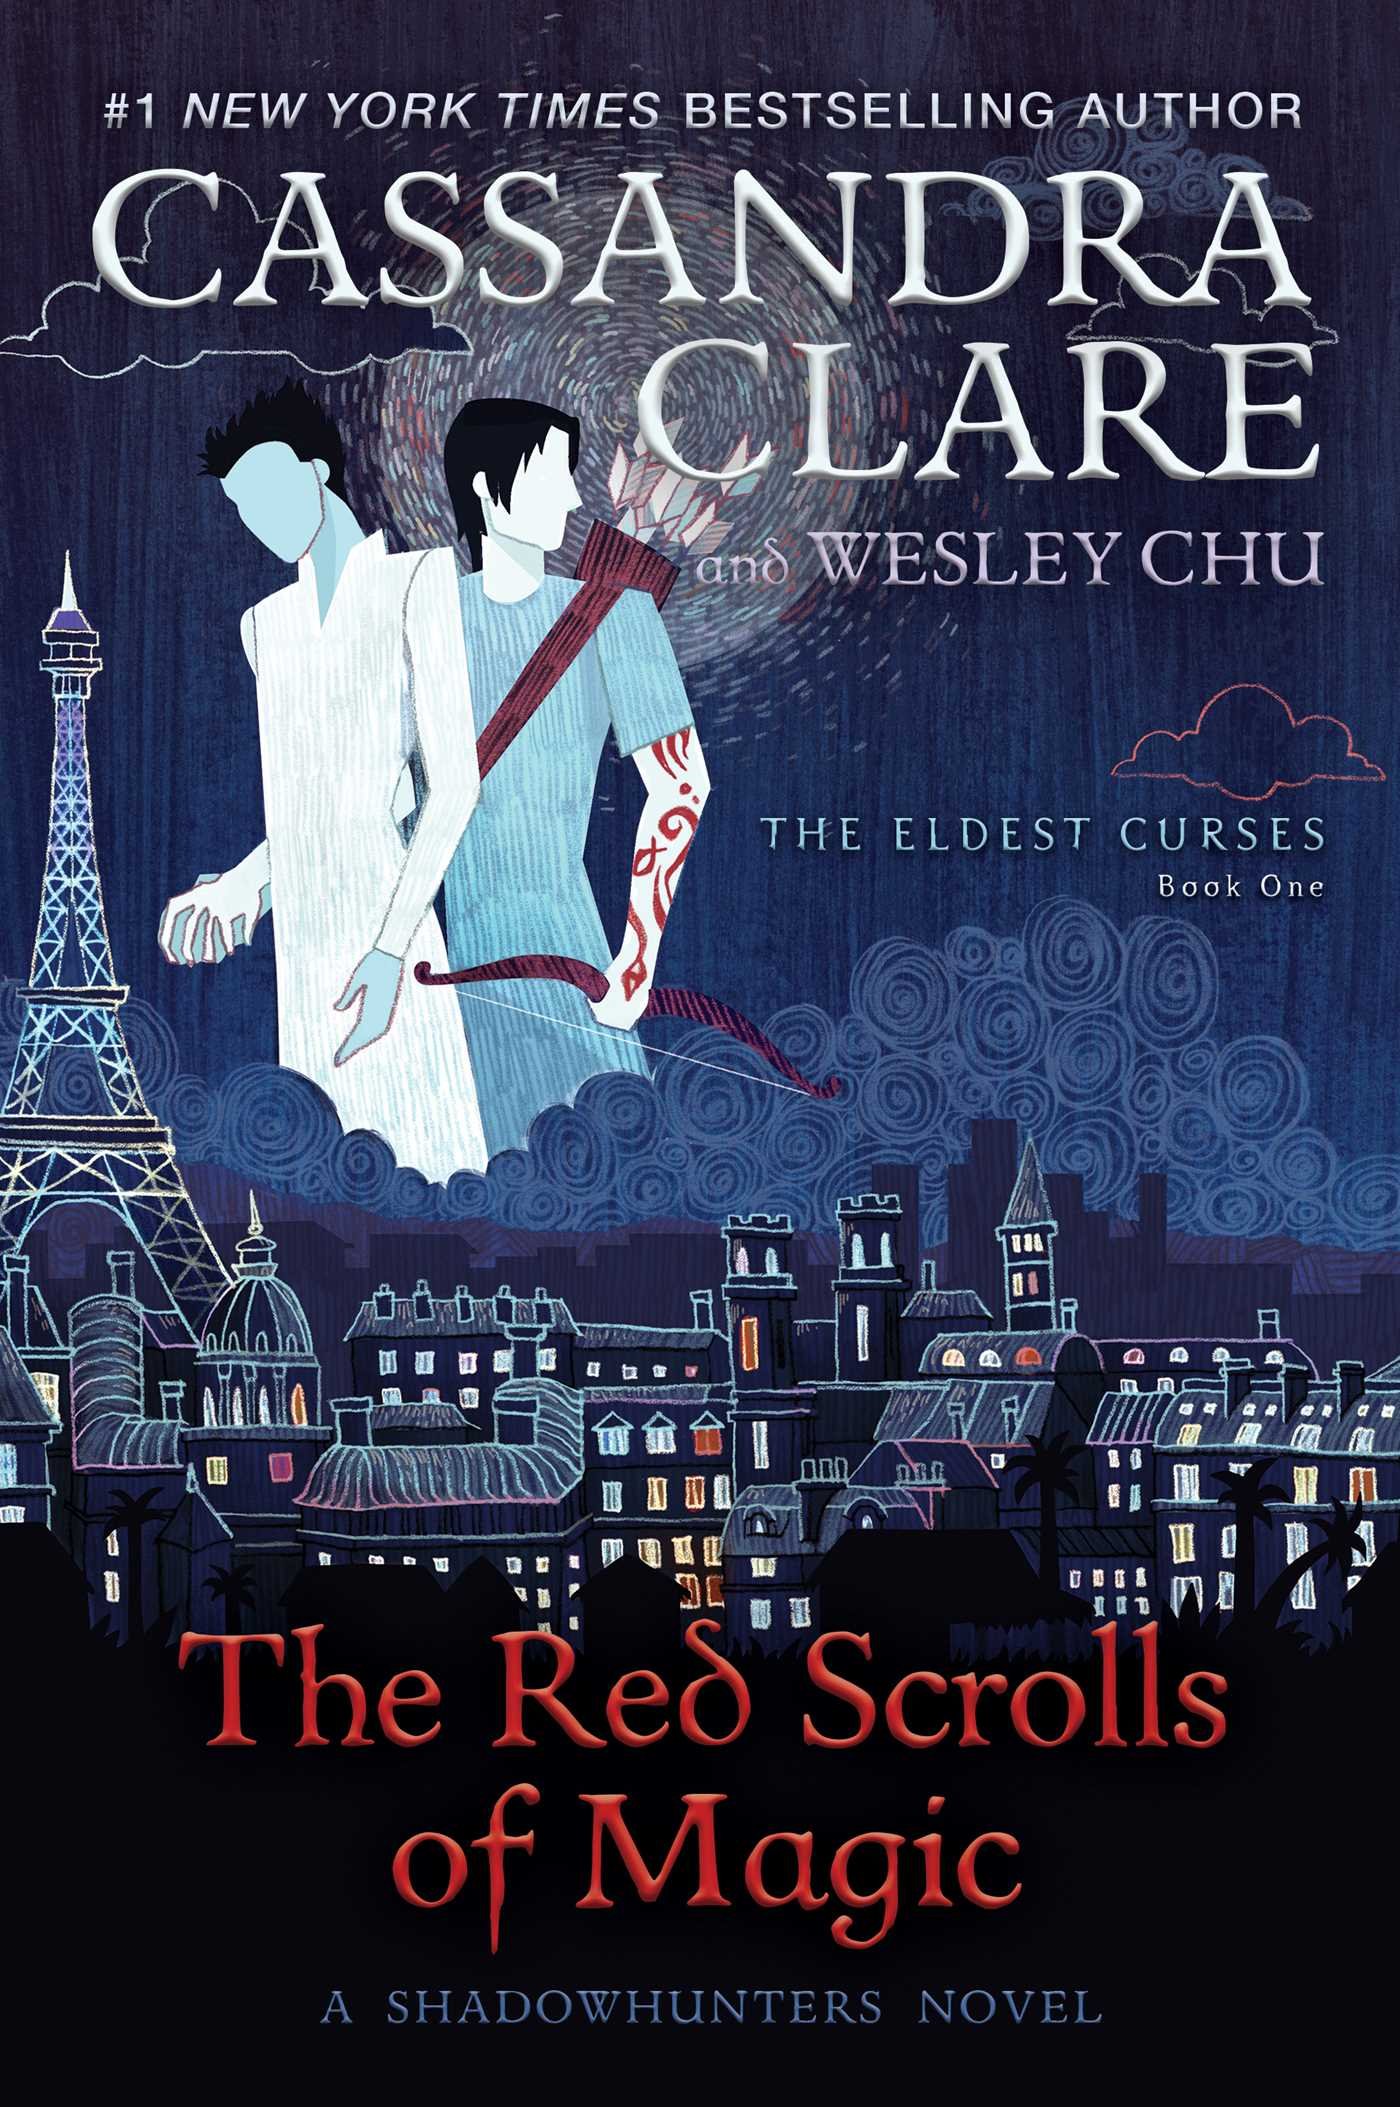 Image for "Red Scrolls of Magic" 